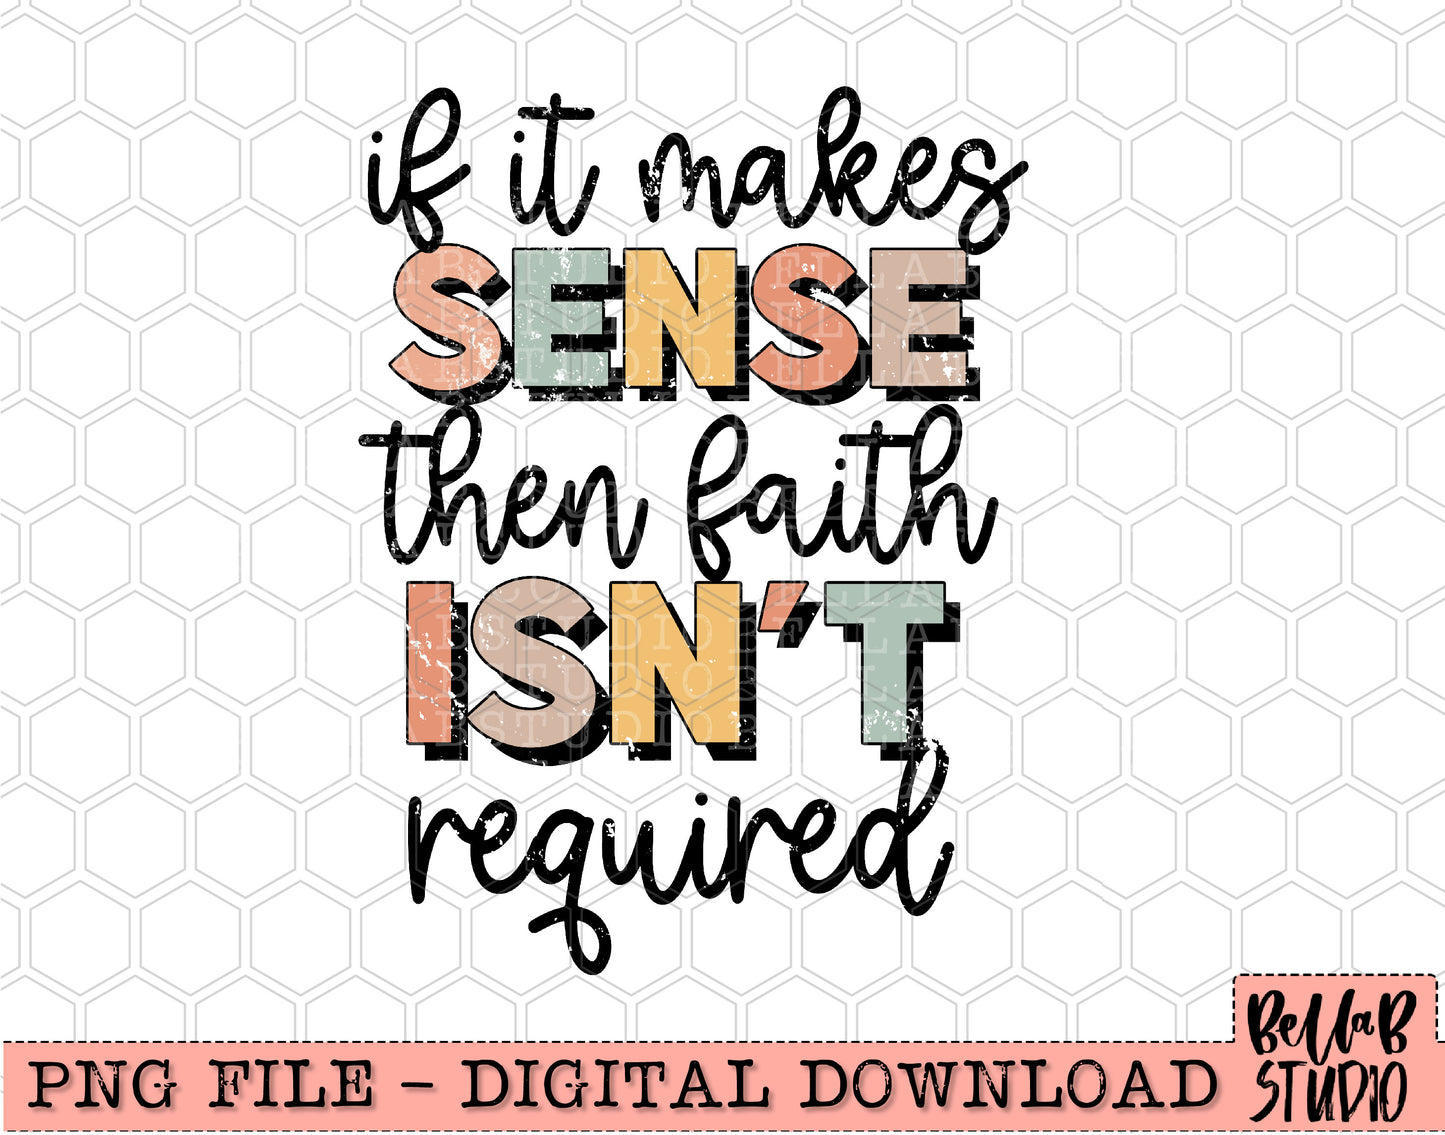 If It Makes Sense Then Faith Isn't Required PNG Design